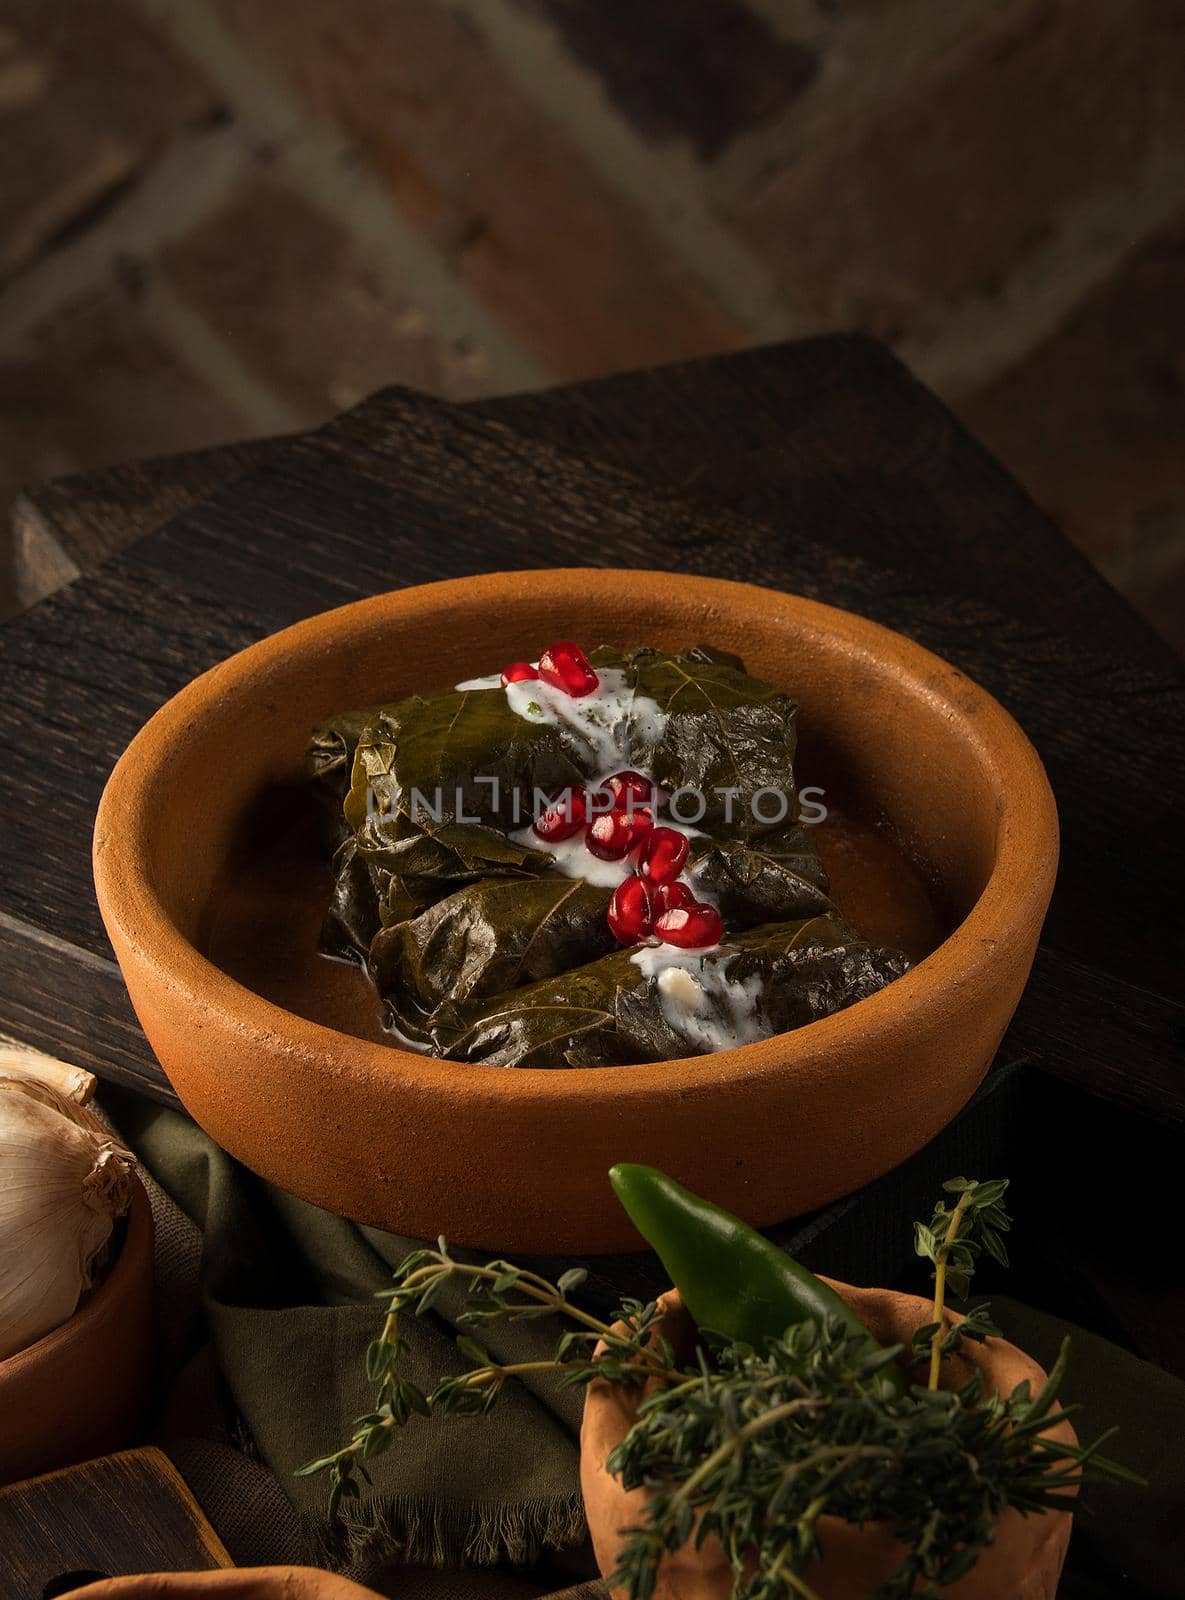 Dolma covered in grape leaves by A_Karim